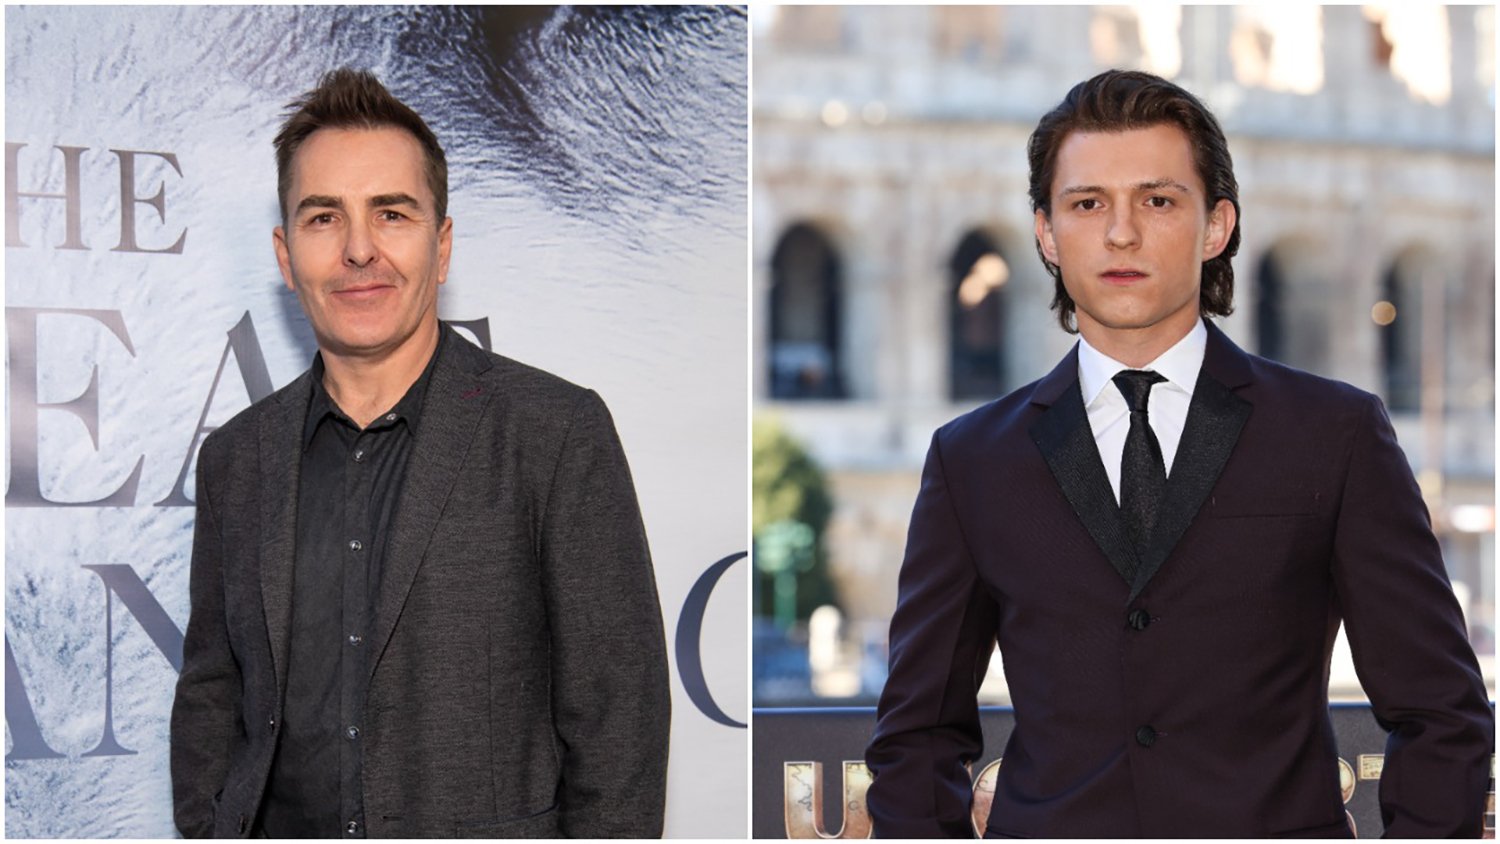 Uncharted voice actor Nolan North at The Great Alaskan Race premiere / Tom Holland at an Uncharted photocall in Rome, Italy